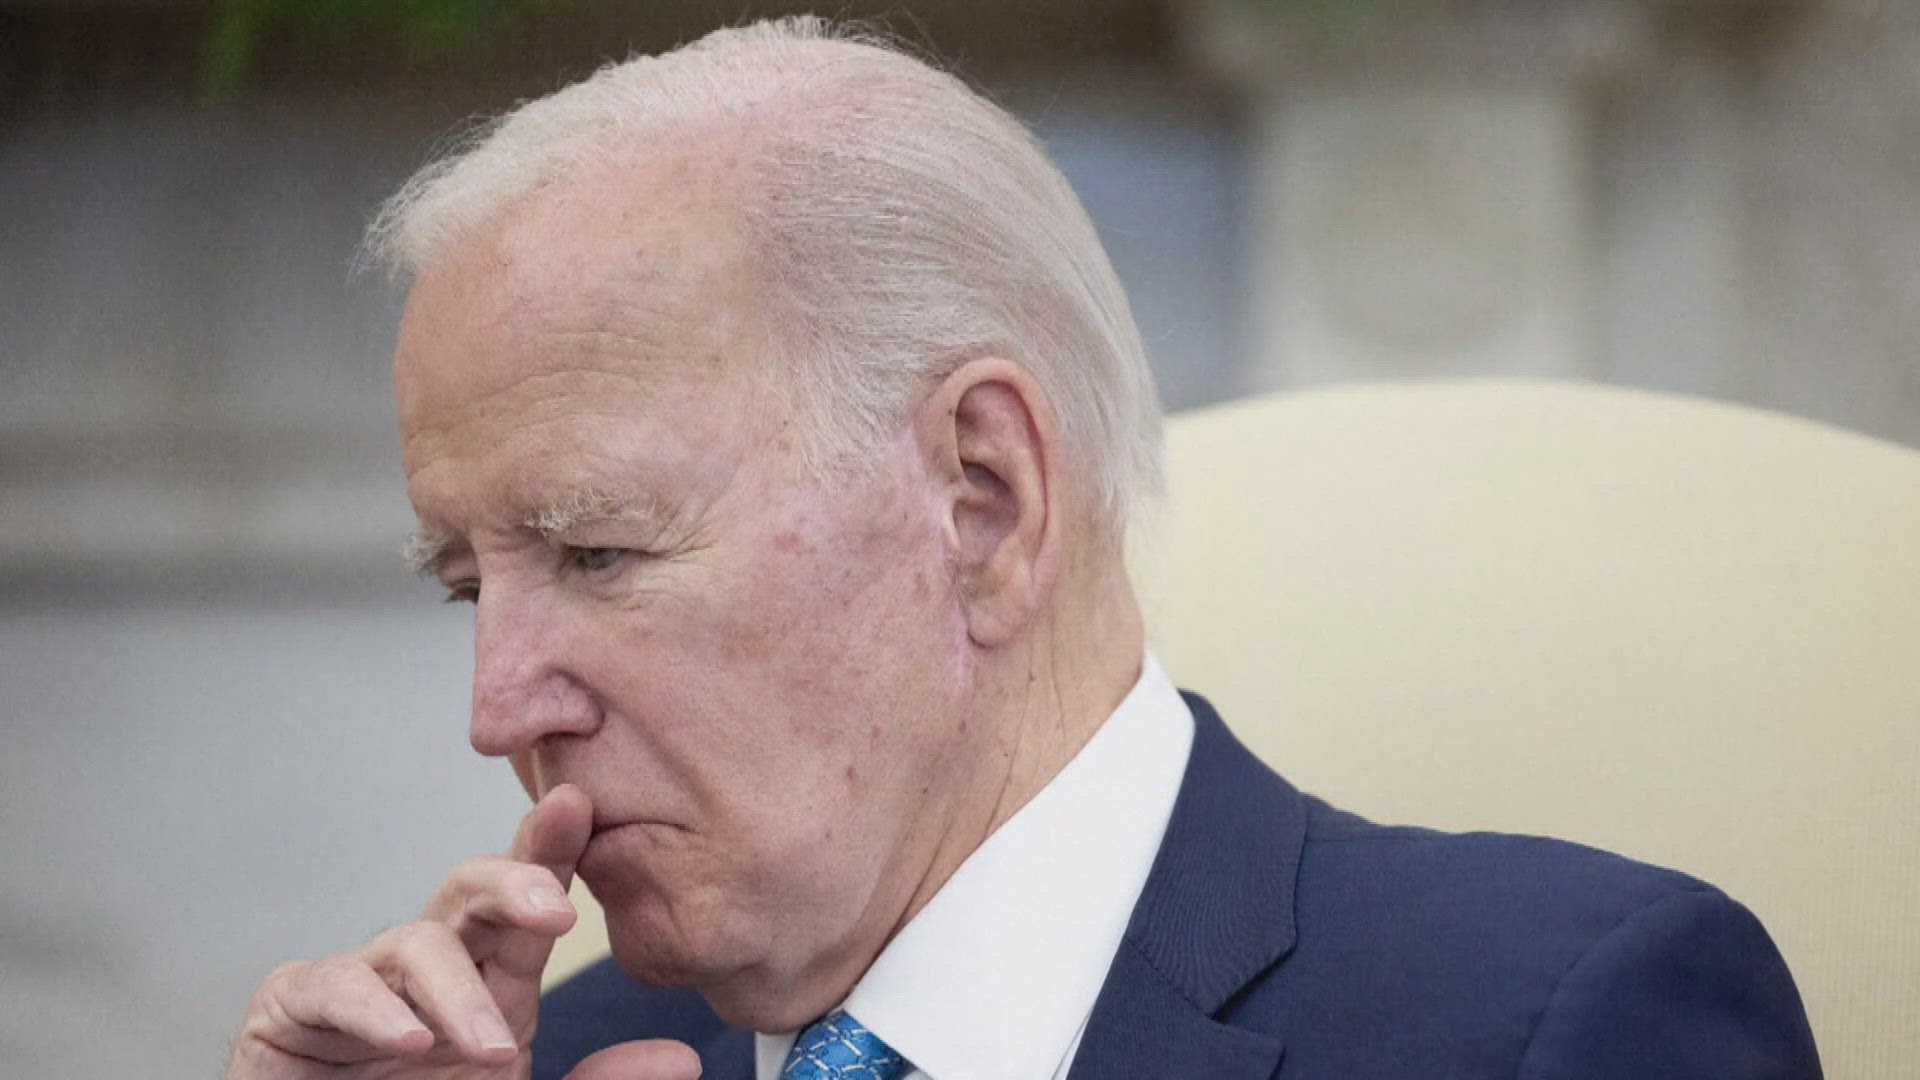 The Biden campaign is still working to reassure the public that he is capable of running the country for four more years.